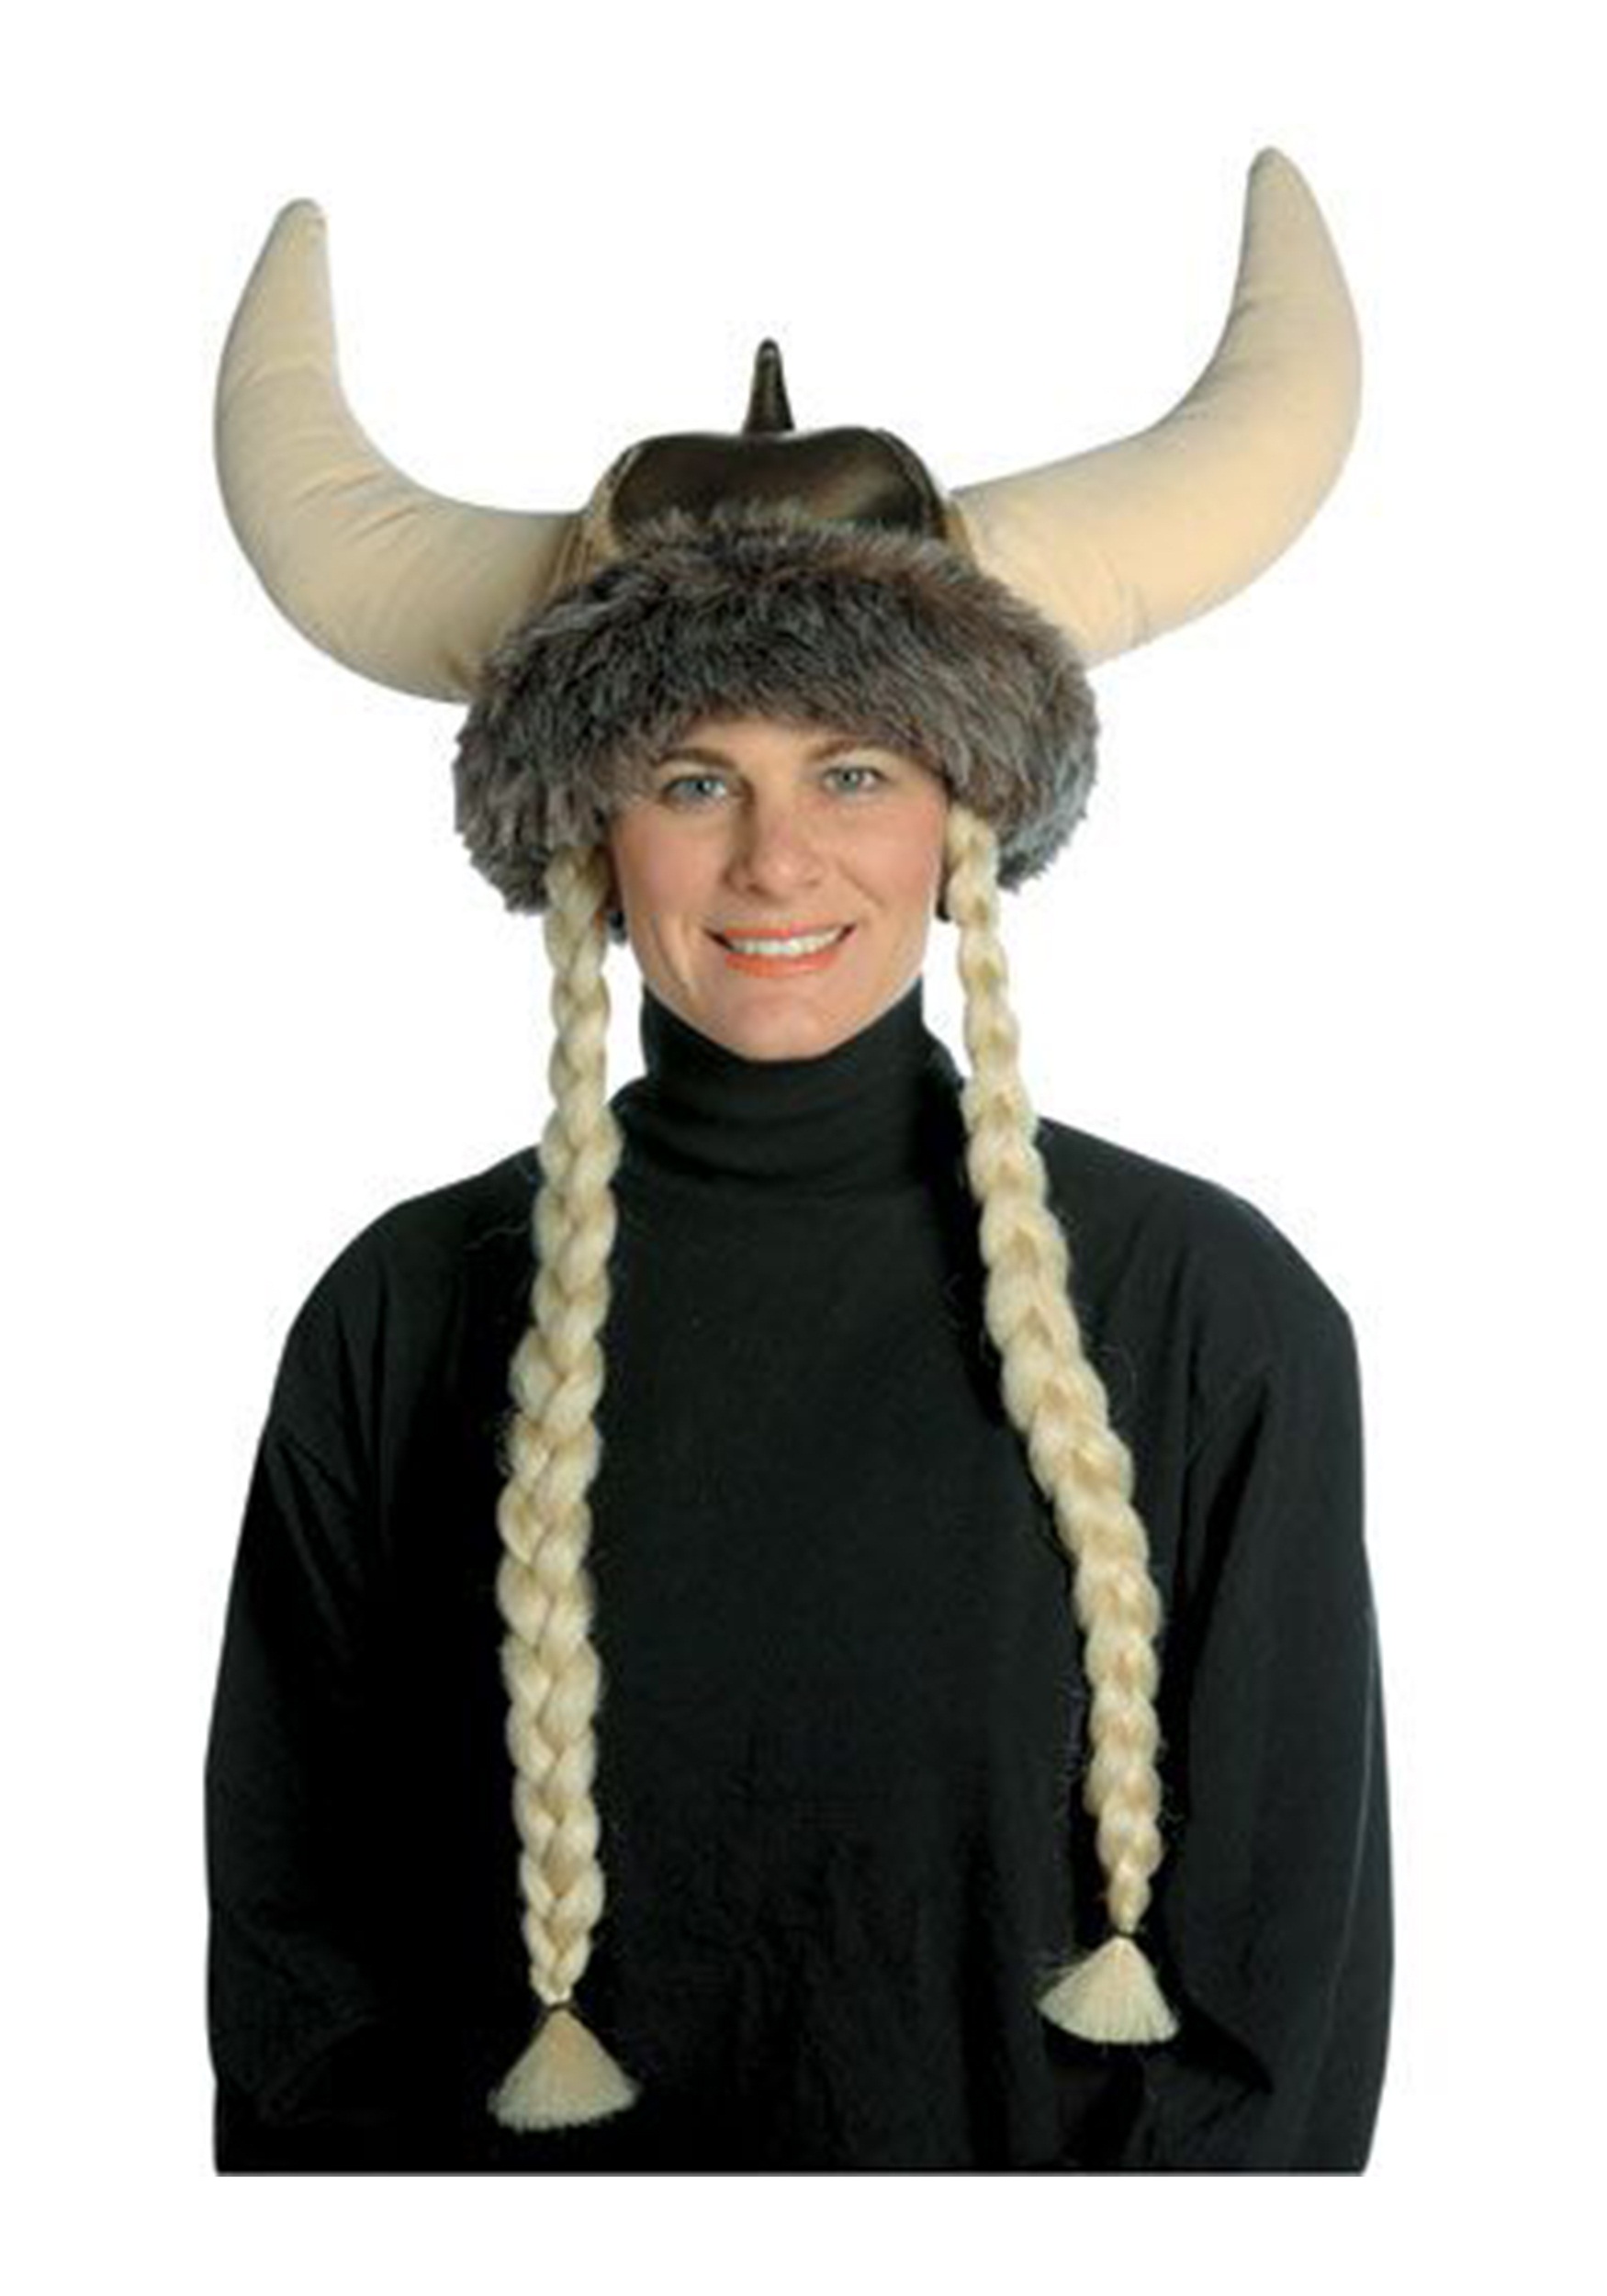 Space Viking Hat with Braids